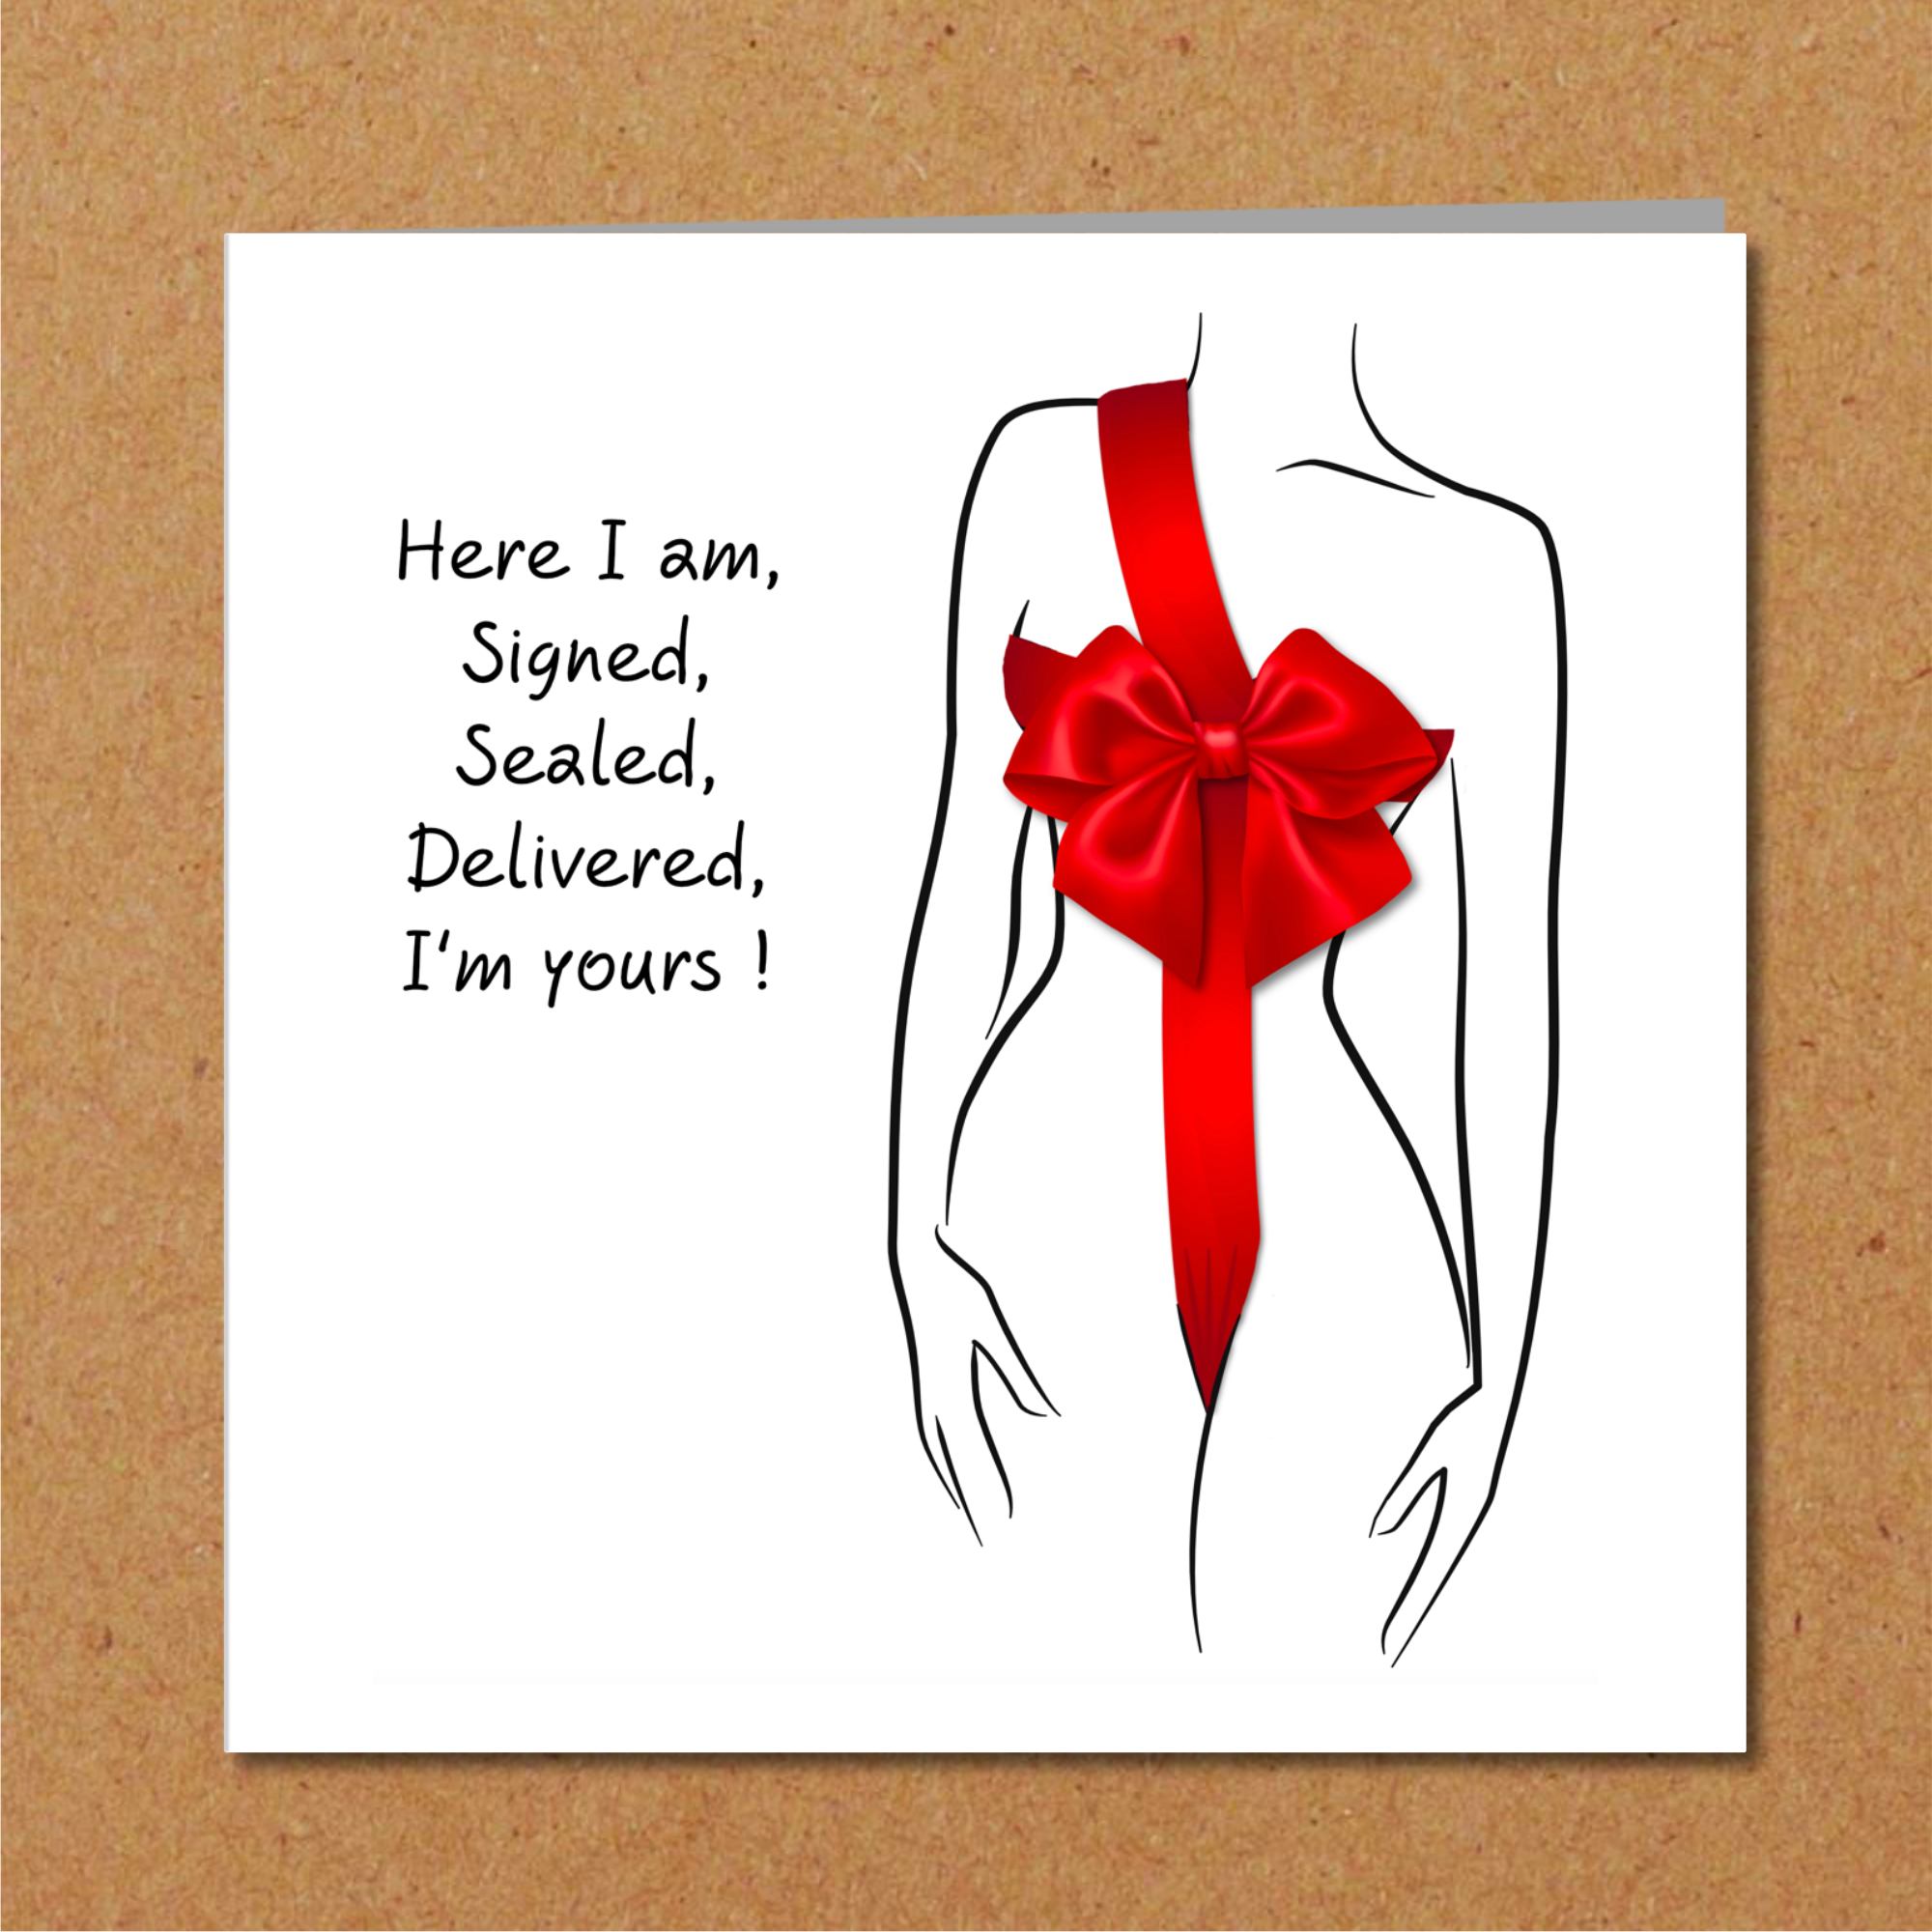 Sexy Birthday or Valentines Card for boyfriend, husband, fiance or lover - Signed sealed delivered - Naughty Rude Naked Bondage